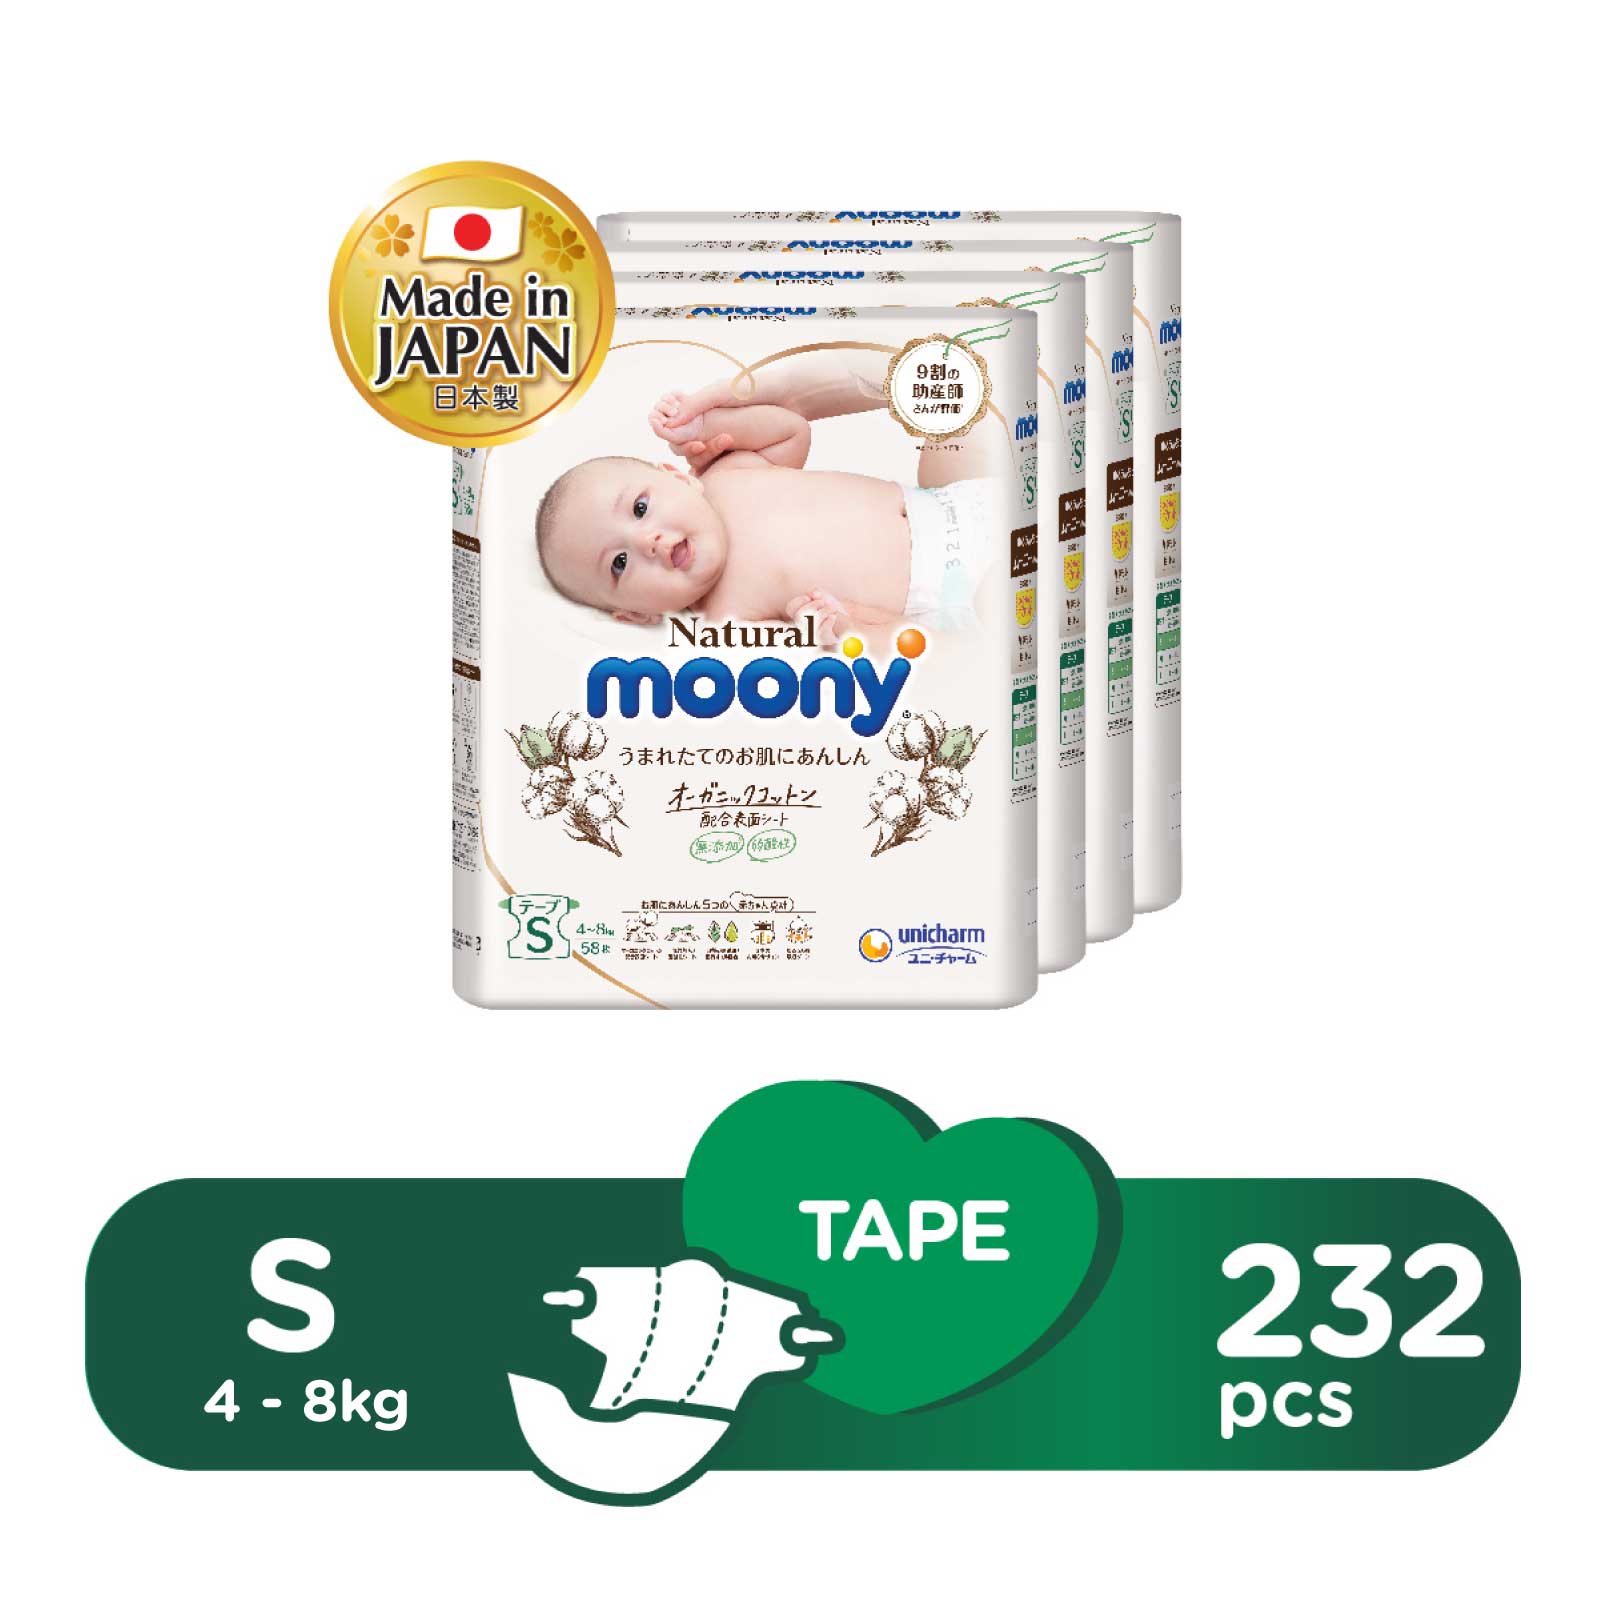 Moony Natural Baby Diapers (Tape) Small (4-8 kg) - 232 pcs (4 packs)